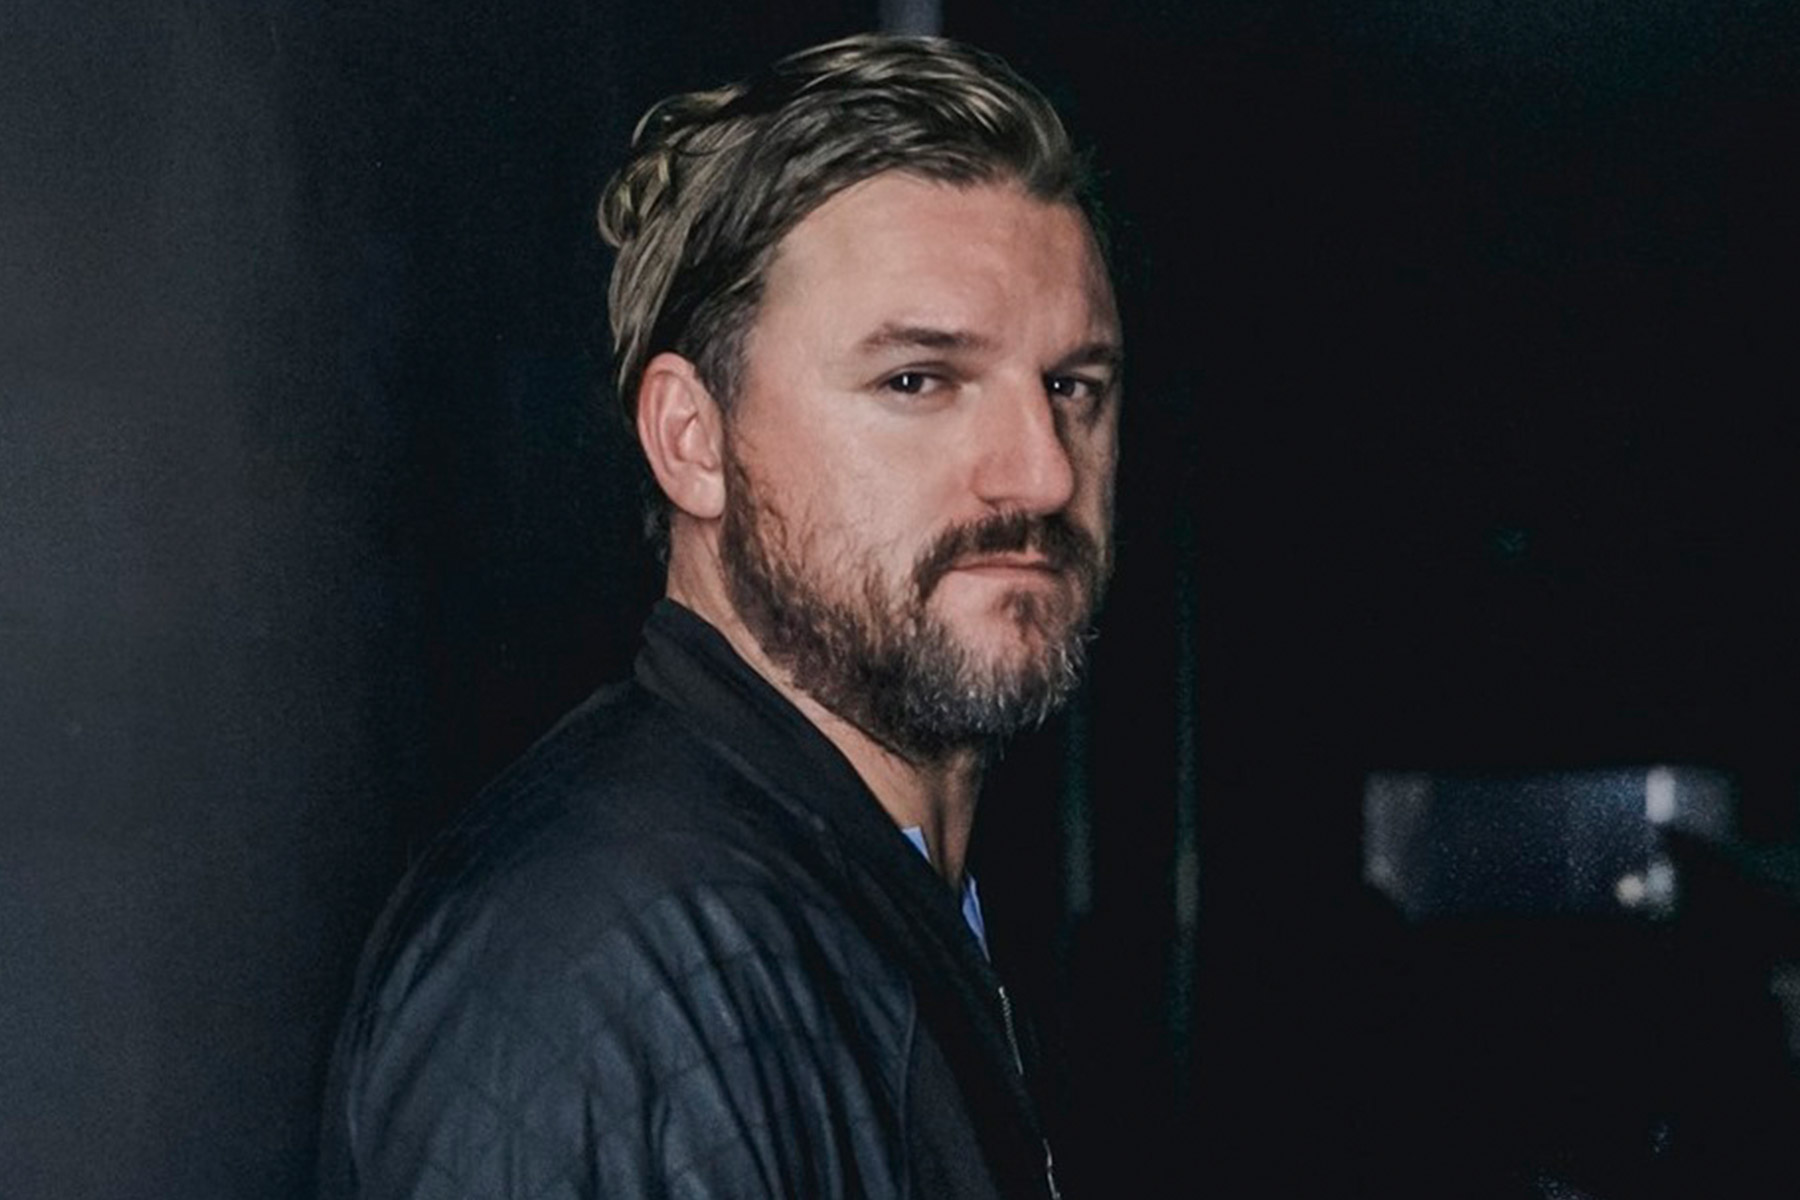 Solomun team up with Framework to take over an abandoned power plant